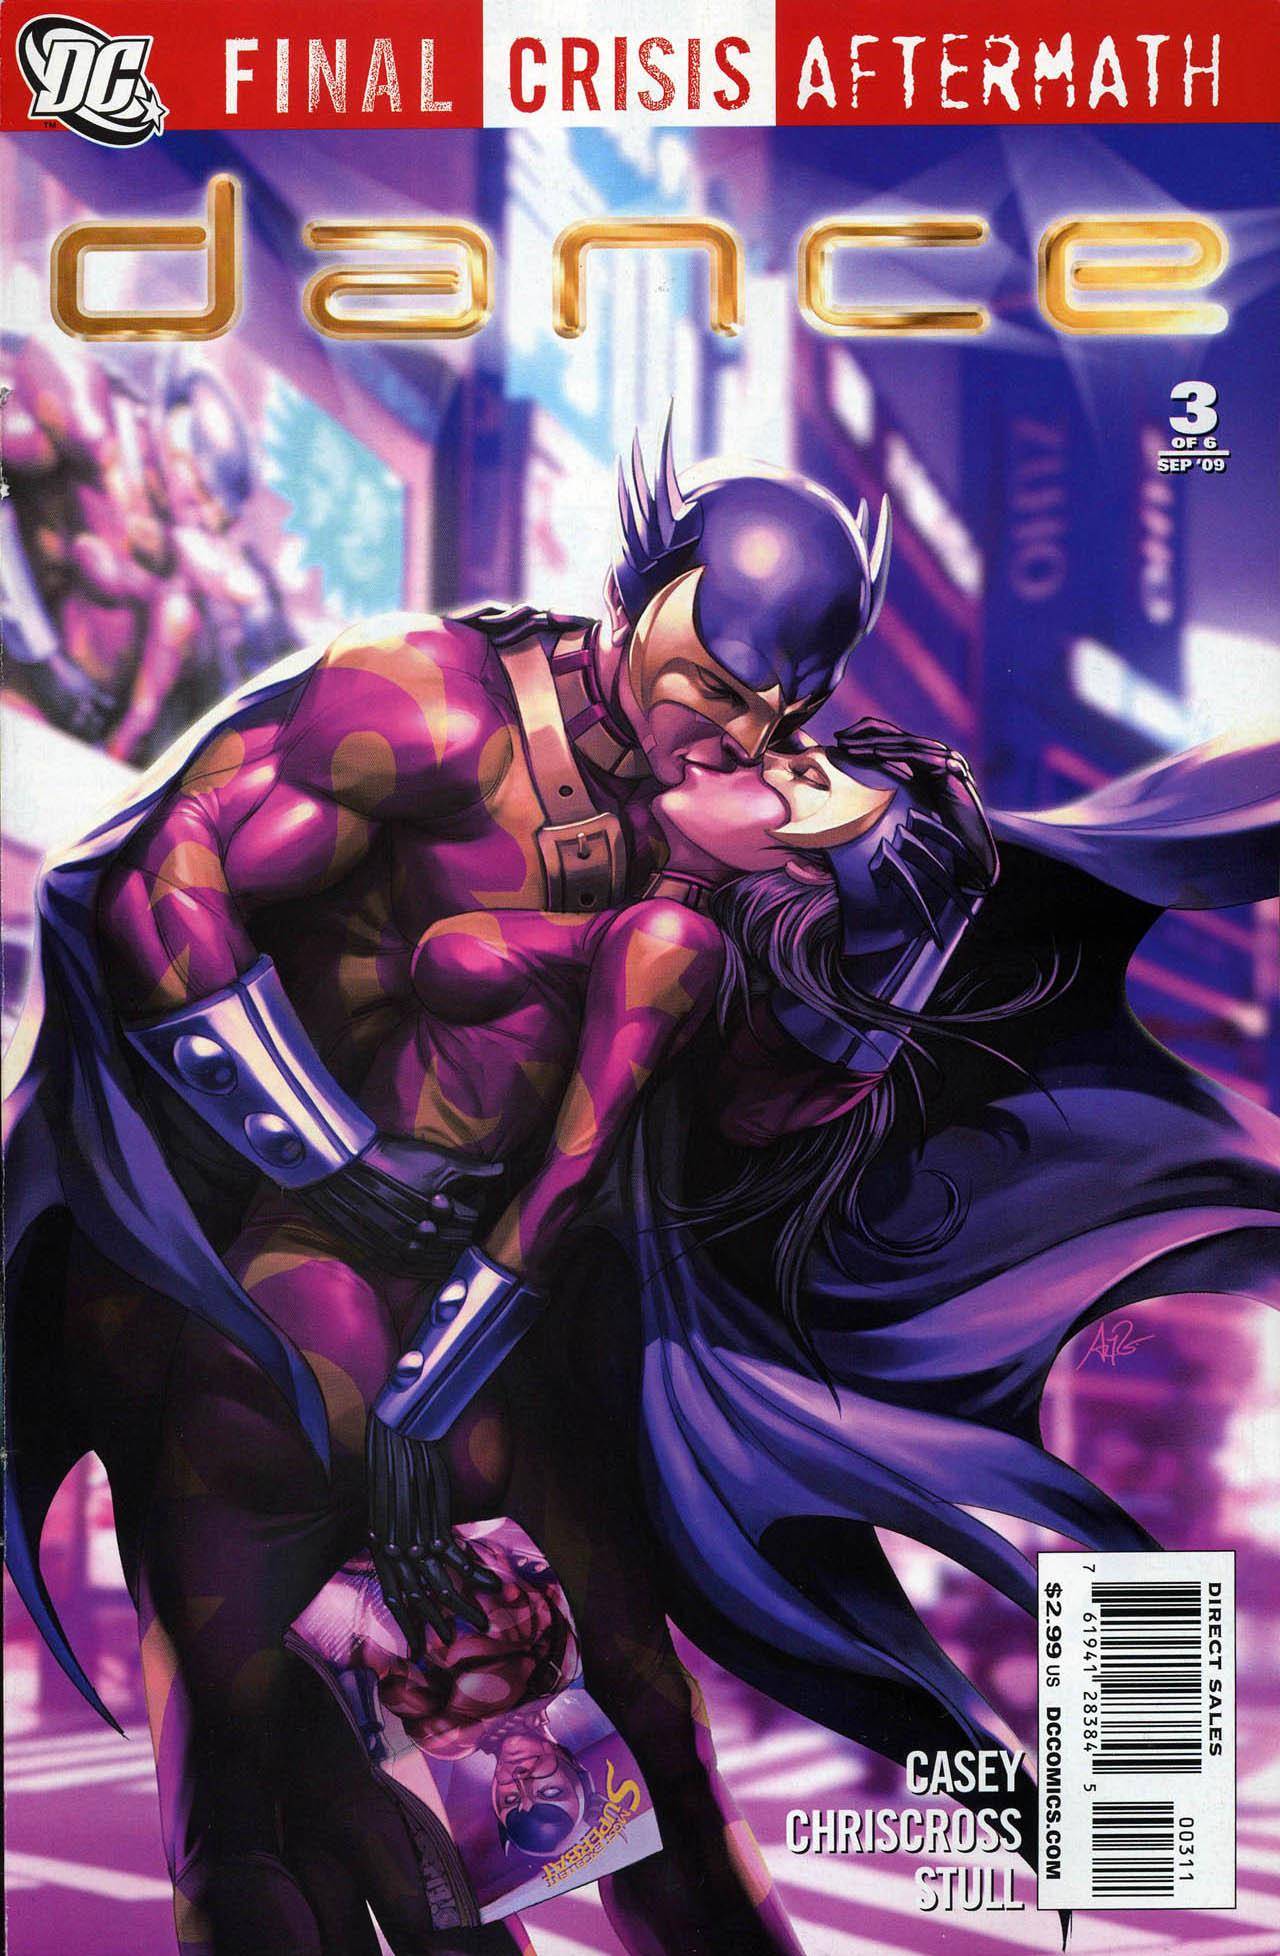 Final Crisis Aftermath - Dance 03 (of 06) (2009)